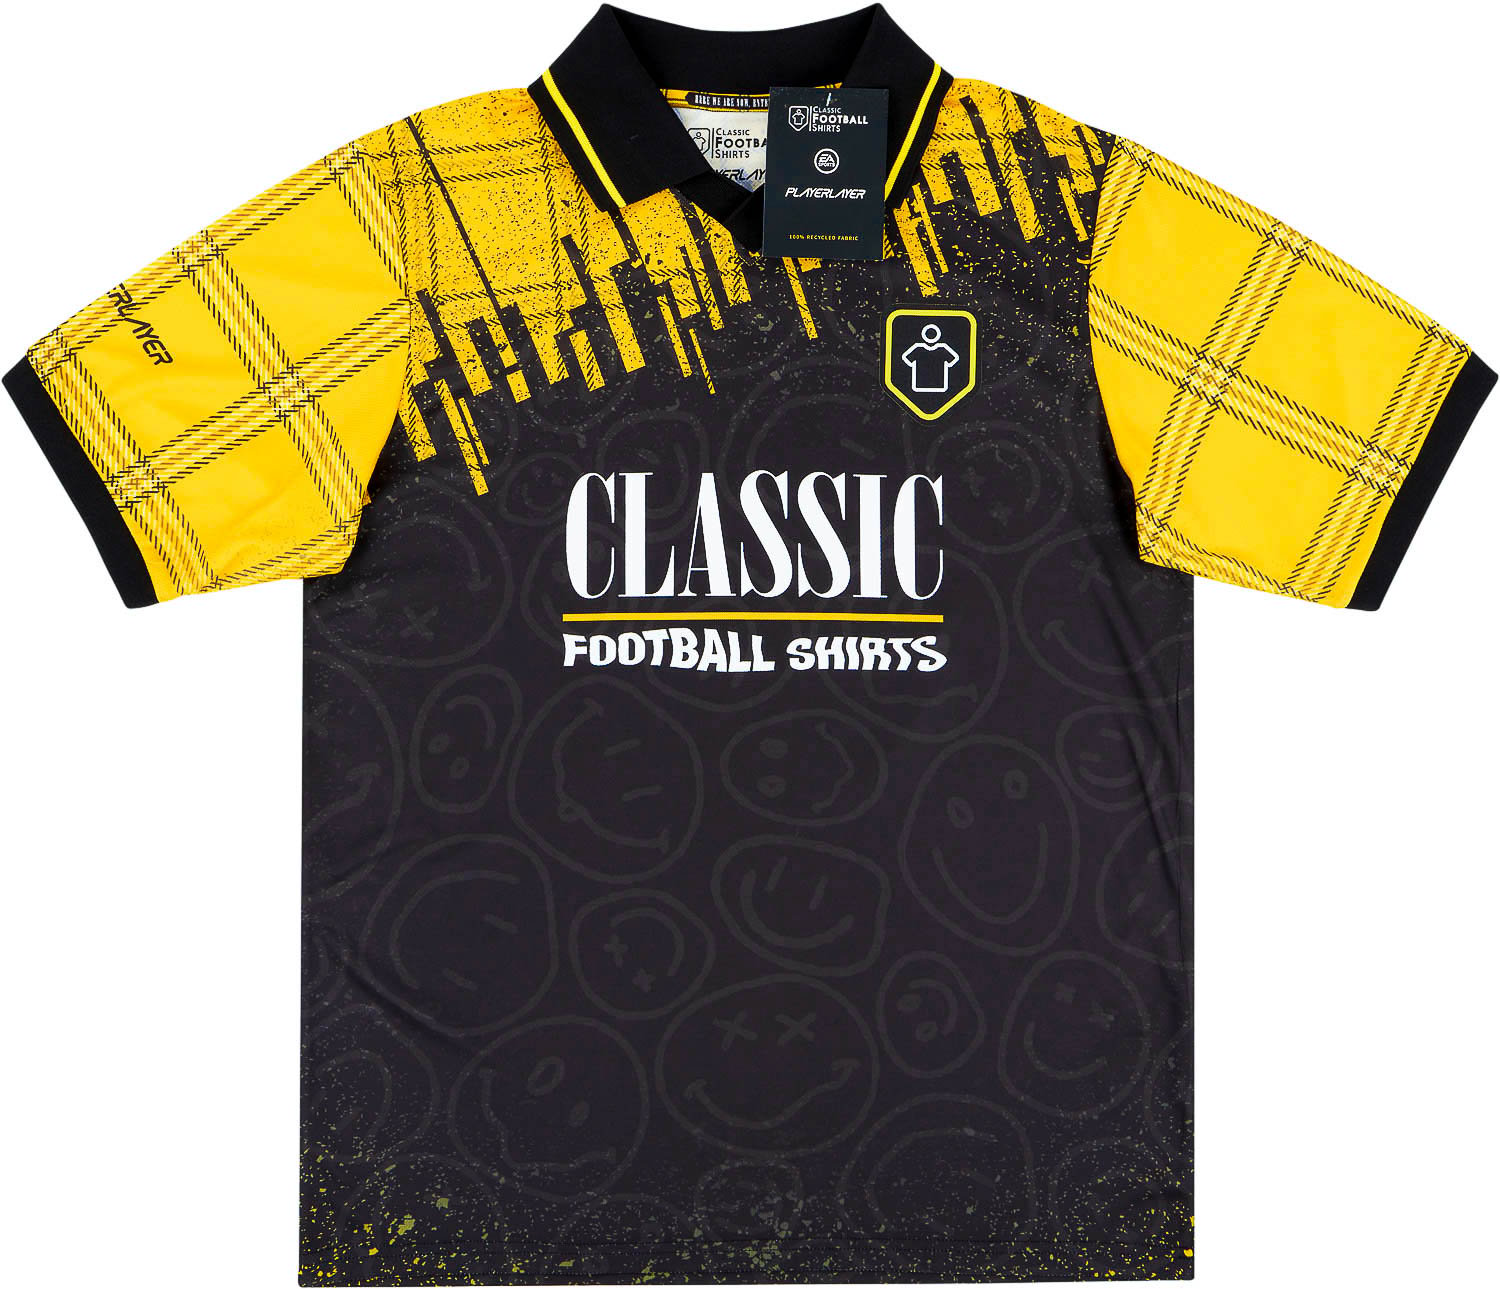 Classic Football Shirts on X: Newcastle 90s Training Top by